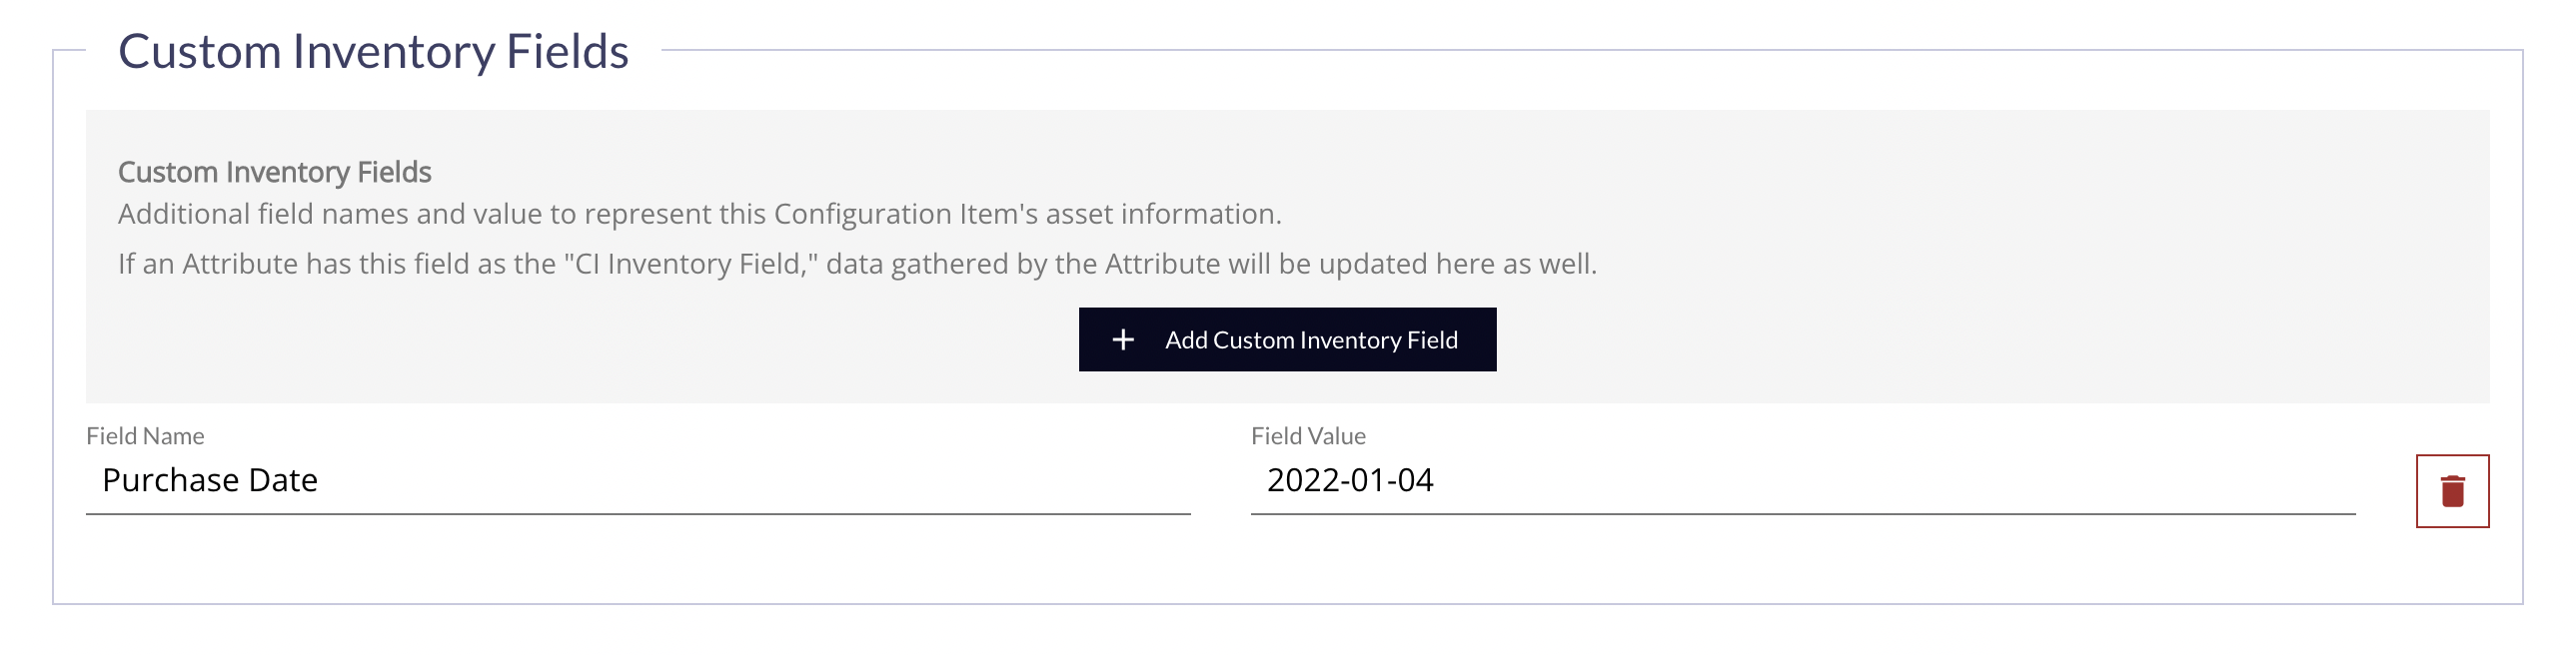 Custom Inventory Fields Panel Subsection